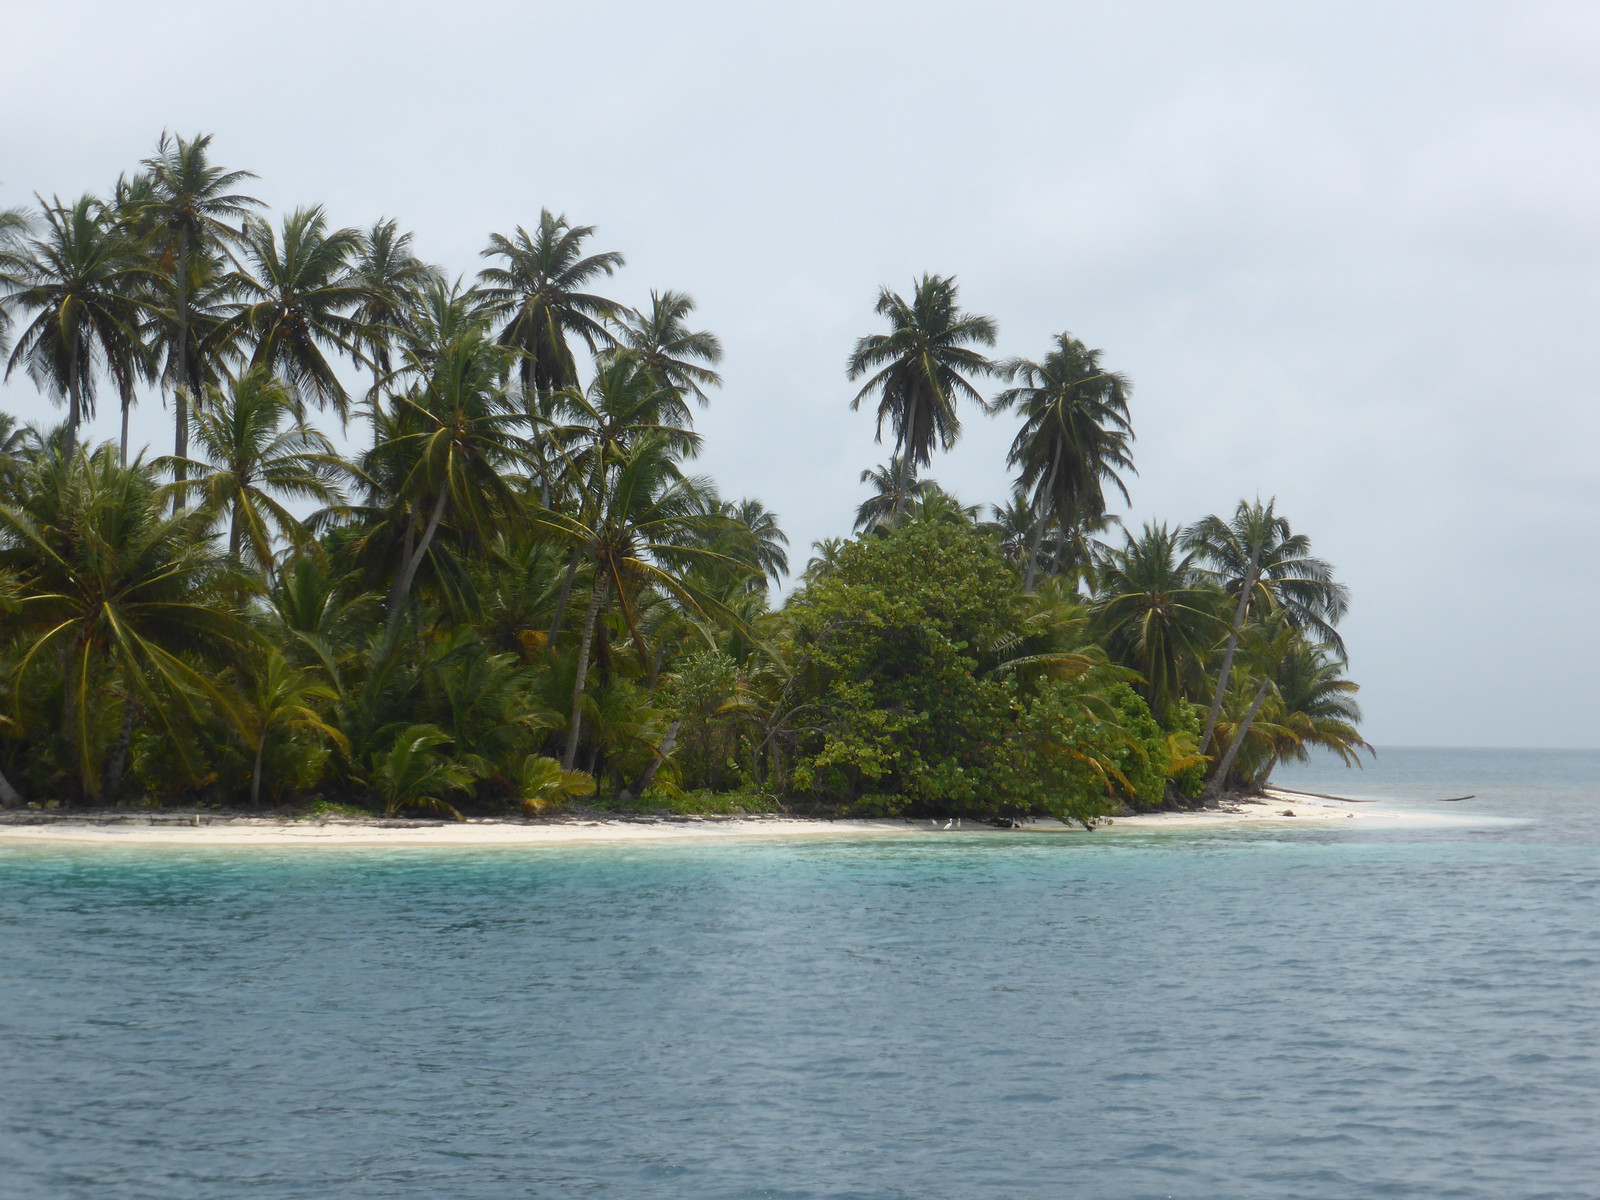 One of the palm-fringed islands of the Cayos Holandeses